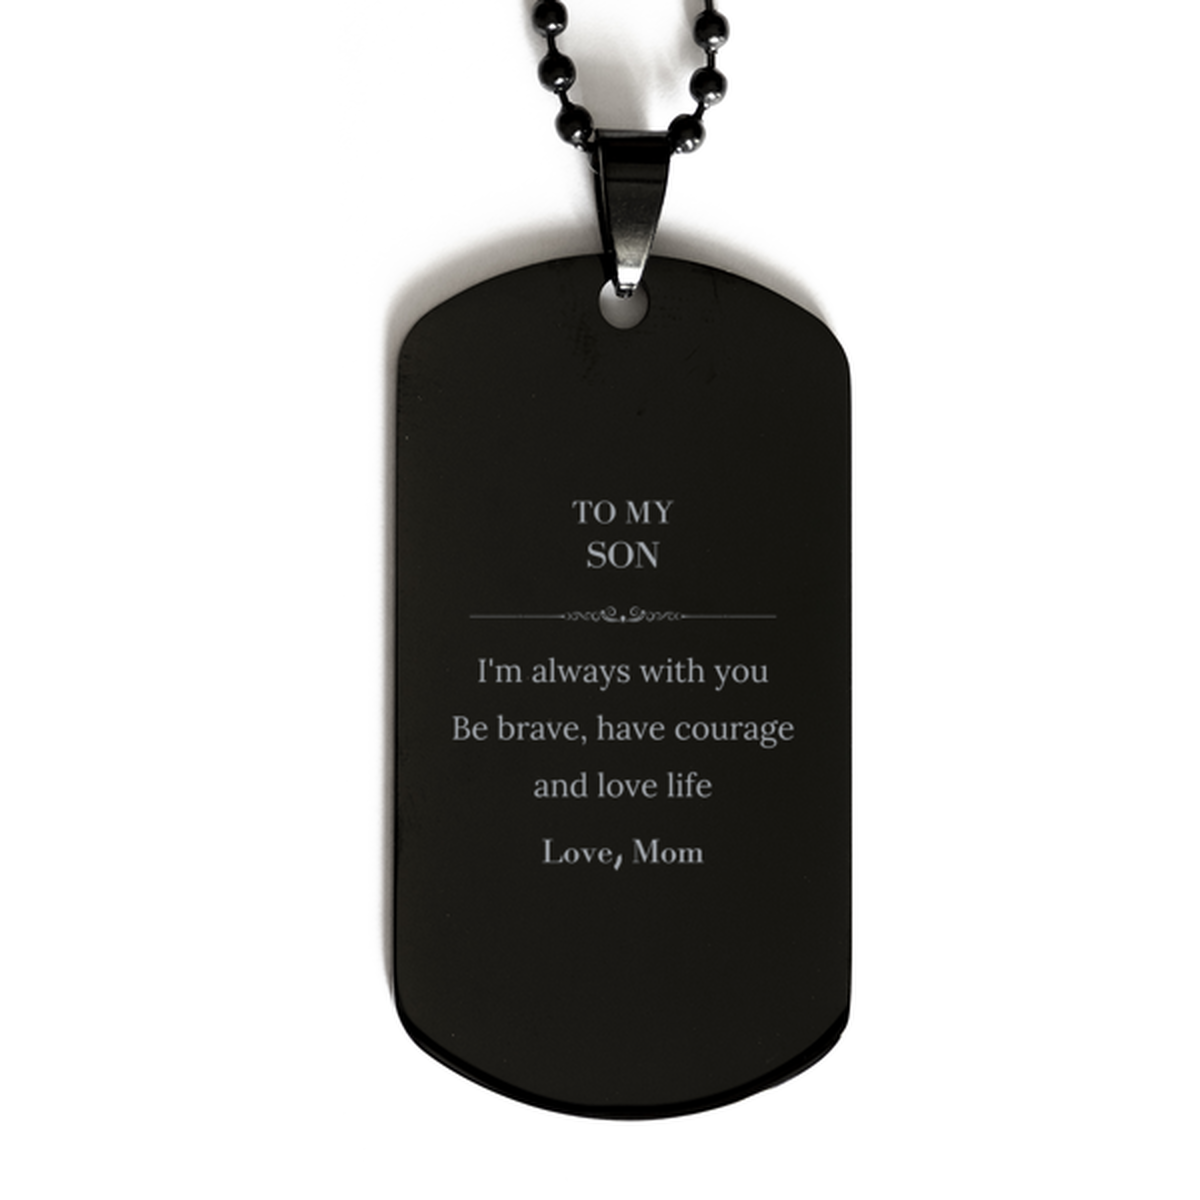 To My Son Gifts from Mom, Unique Black Dog Tag Inspirational Christmas Birthday Graduation Gifts for Son I'm always with you. Be brave, have courage and love life. Love, Mom